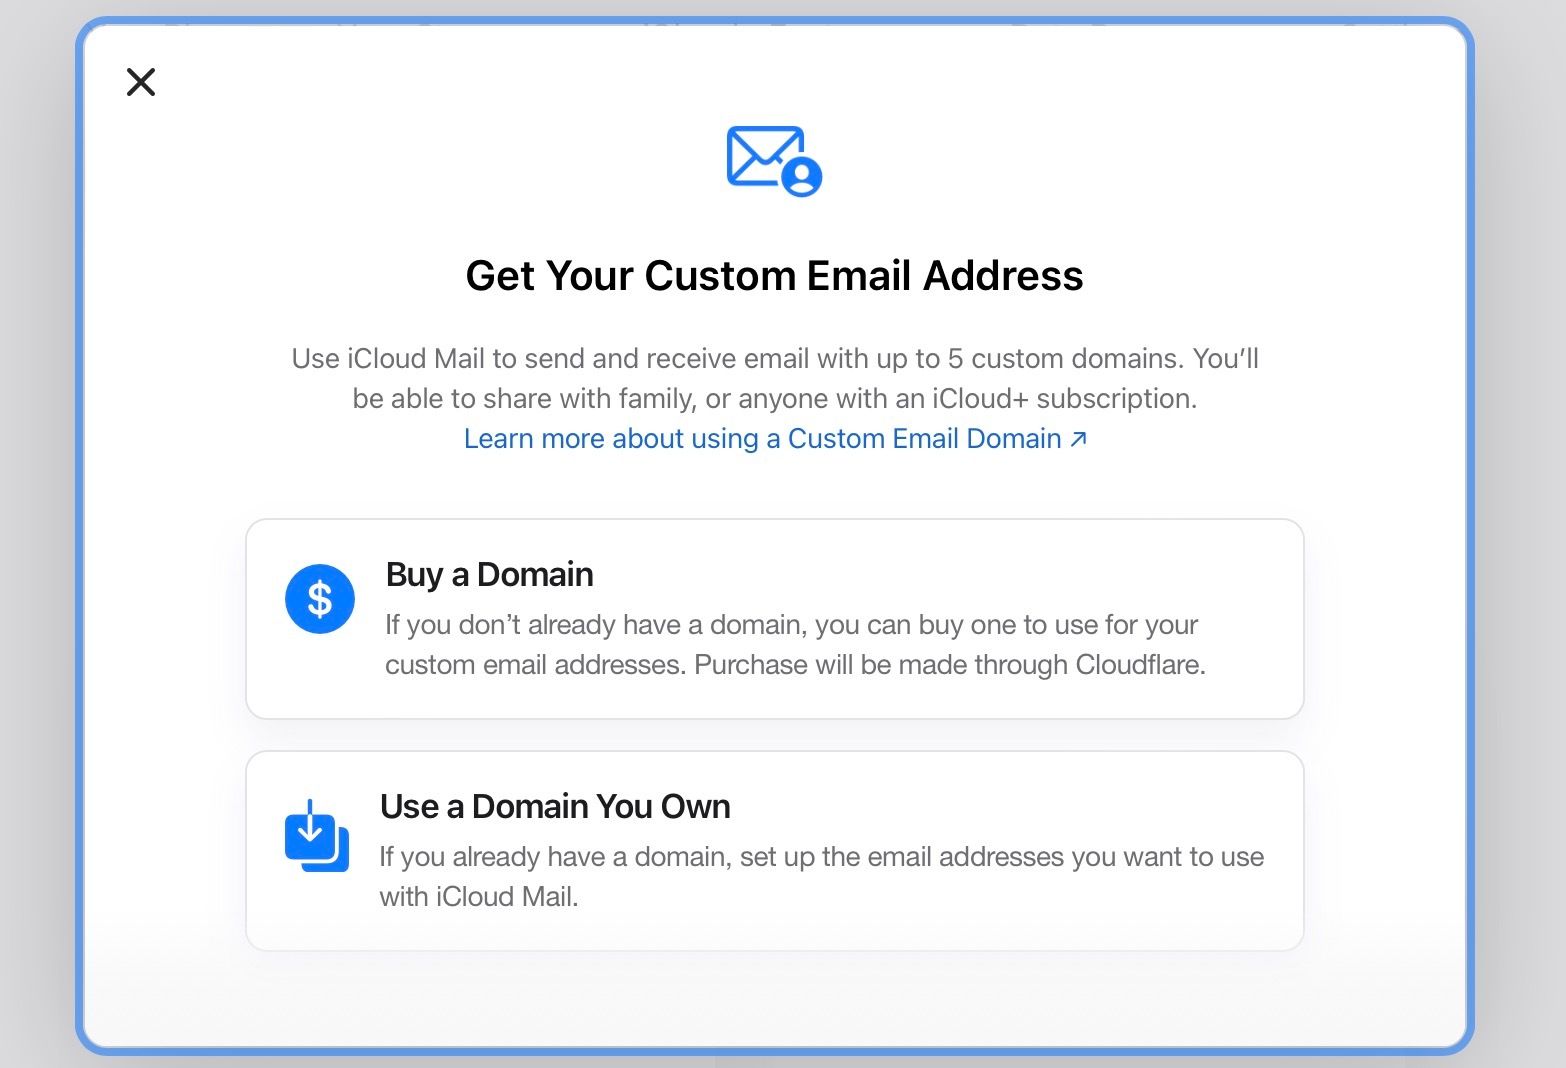 Getting a custom email address for iCloud+ on a Mac